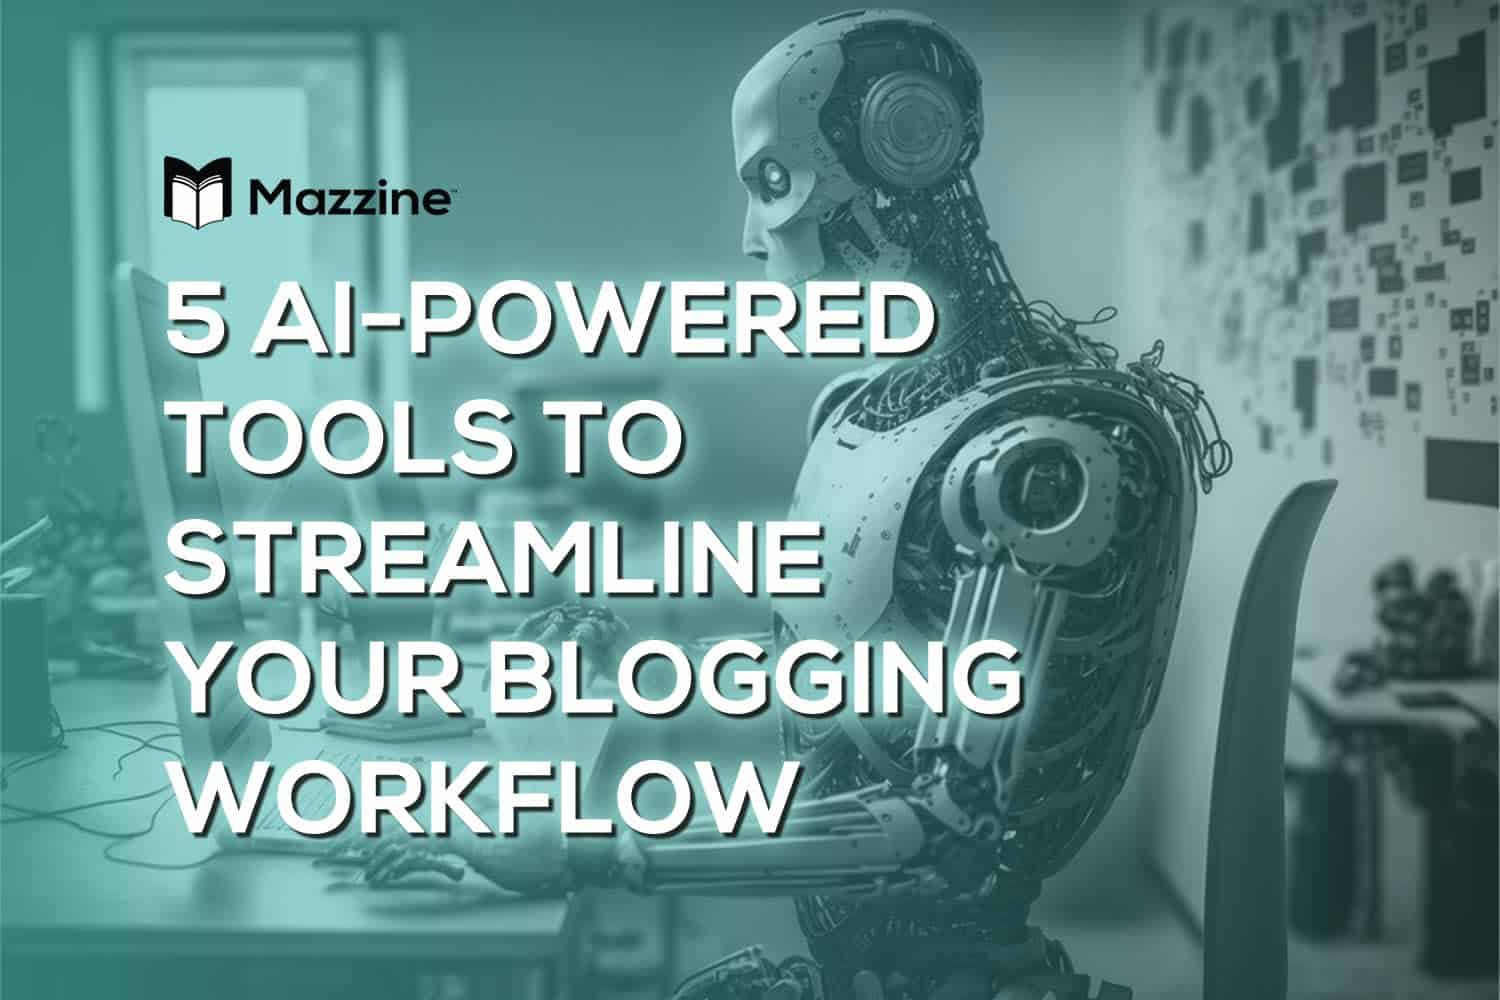 5 AI-Powered Tools to Streamline Your Blogging Workflow